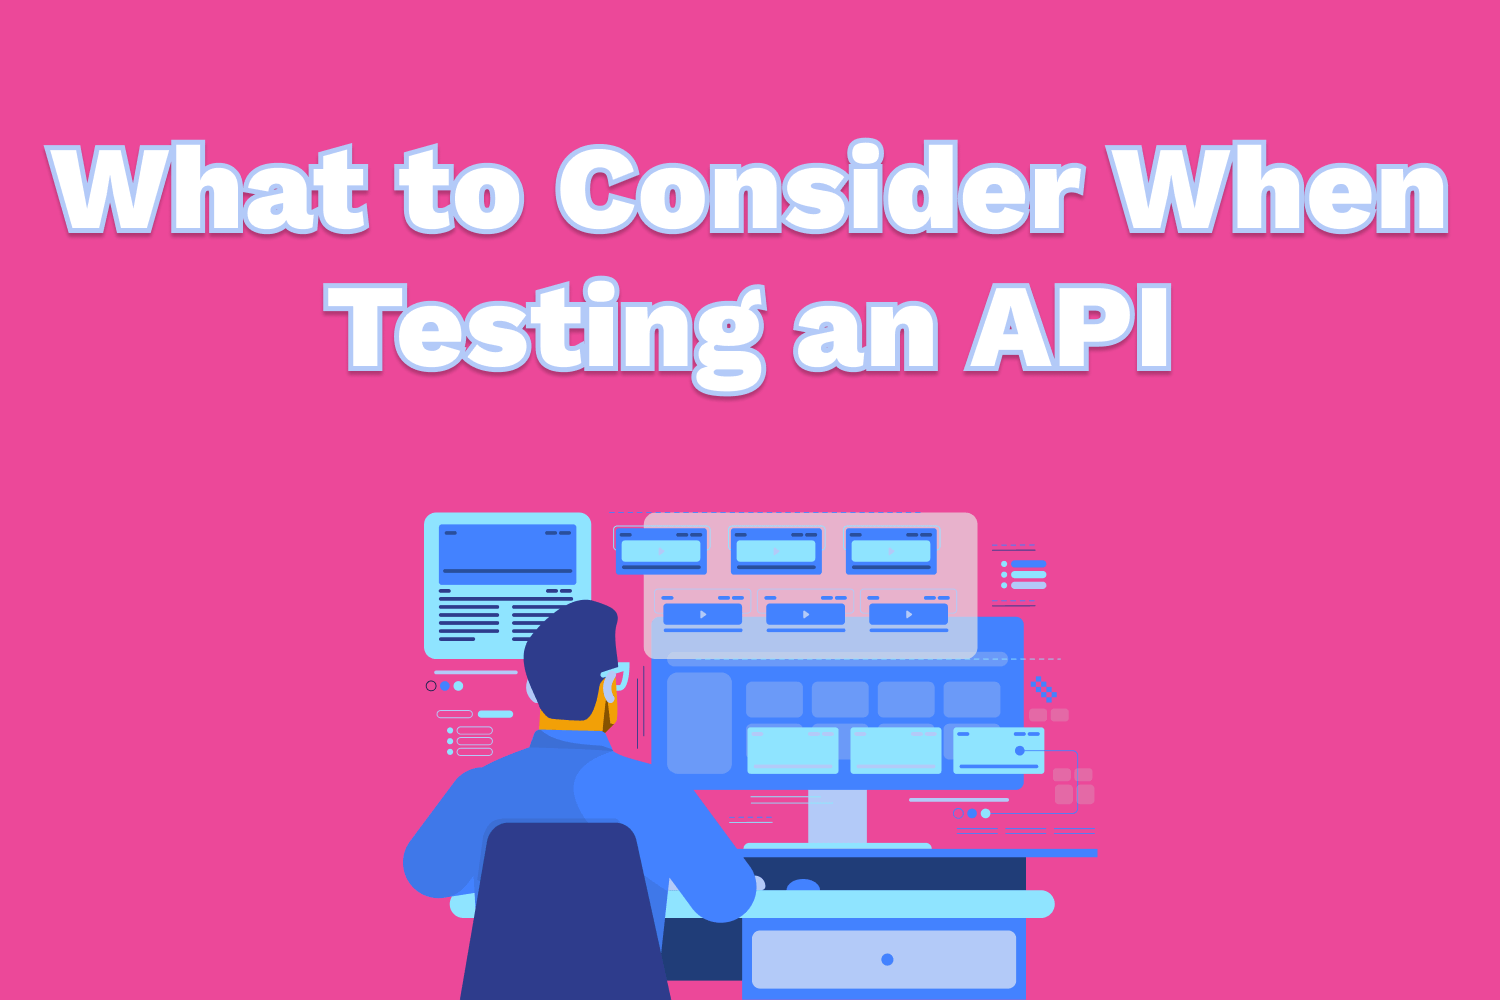 What to Consider When Testing an API